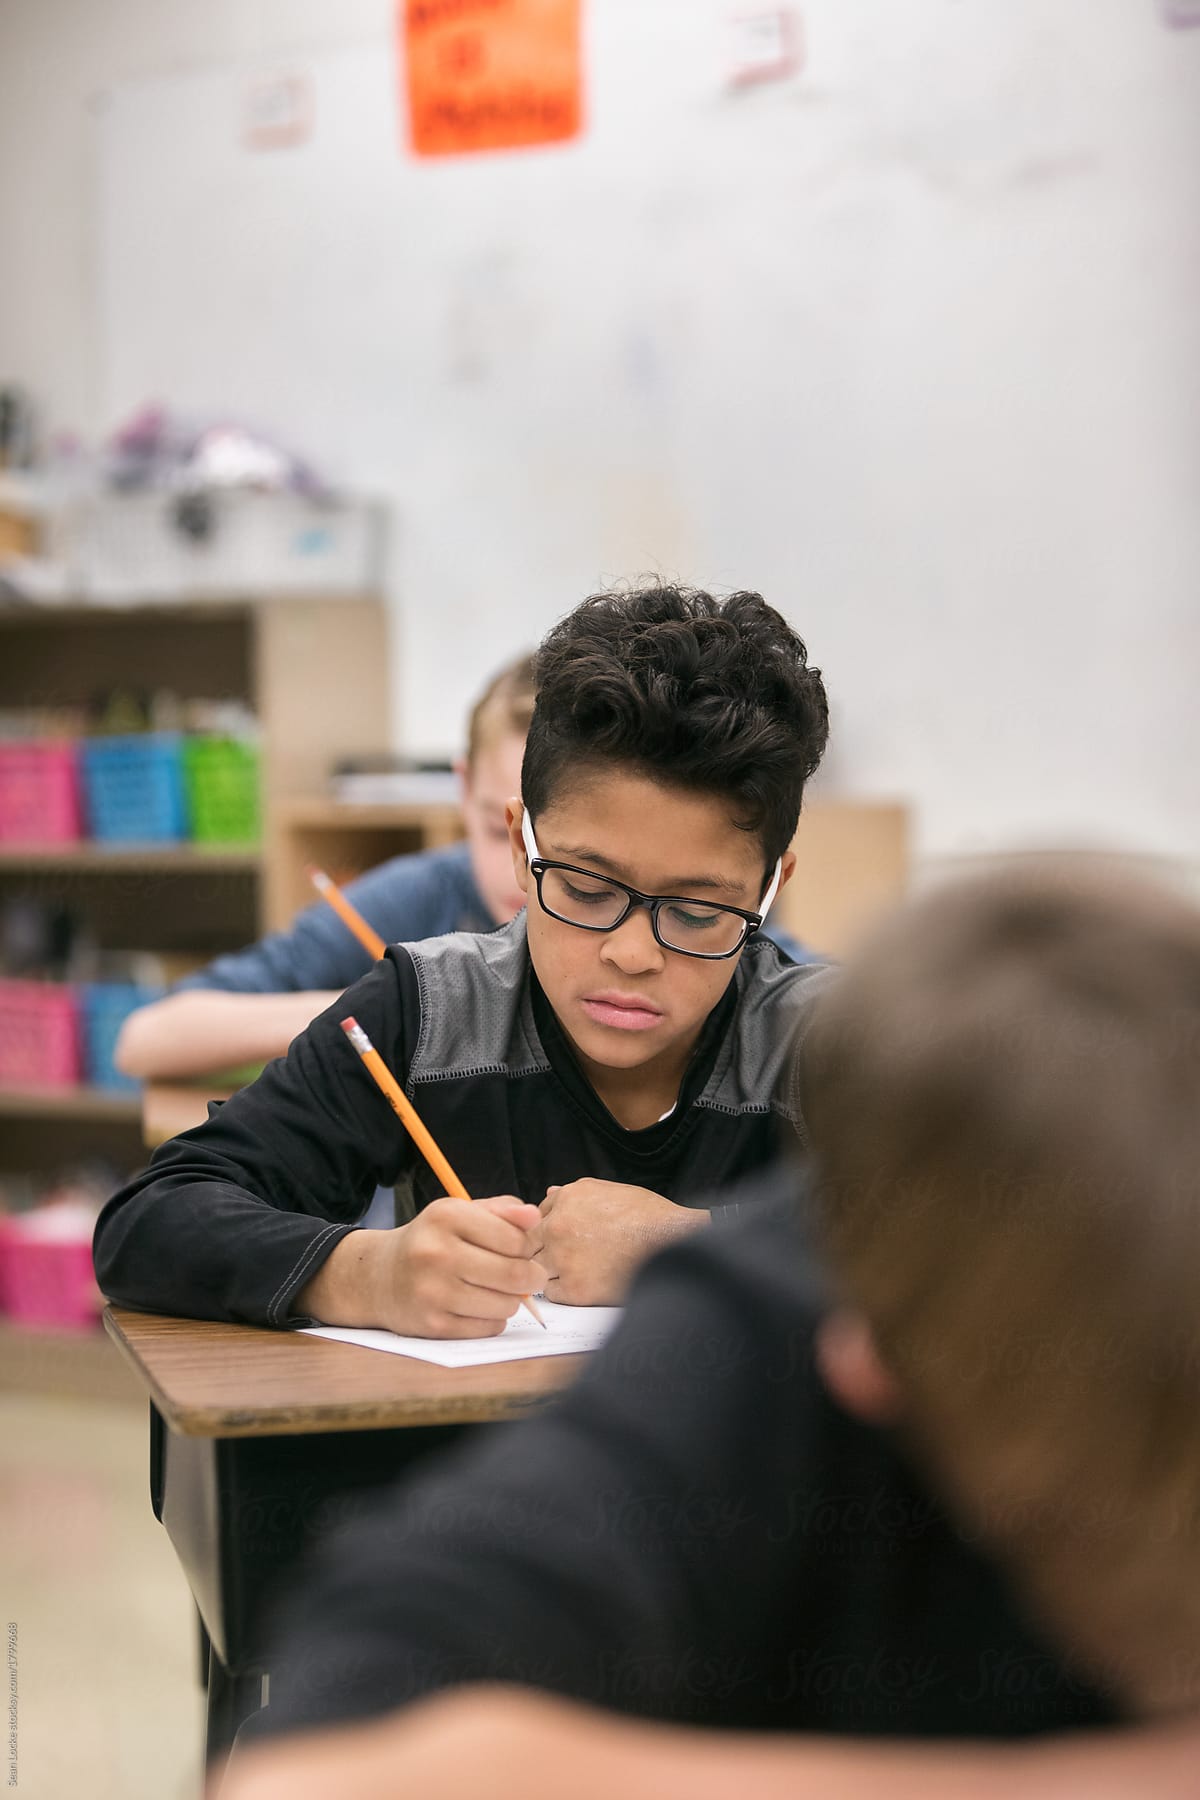 Classroom: Boy With Glasses Doing Classwork